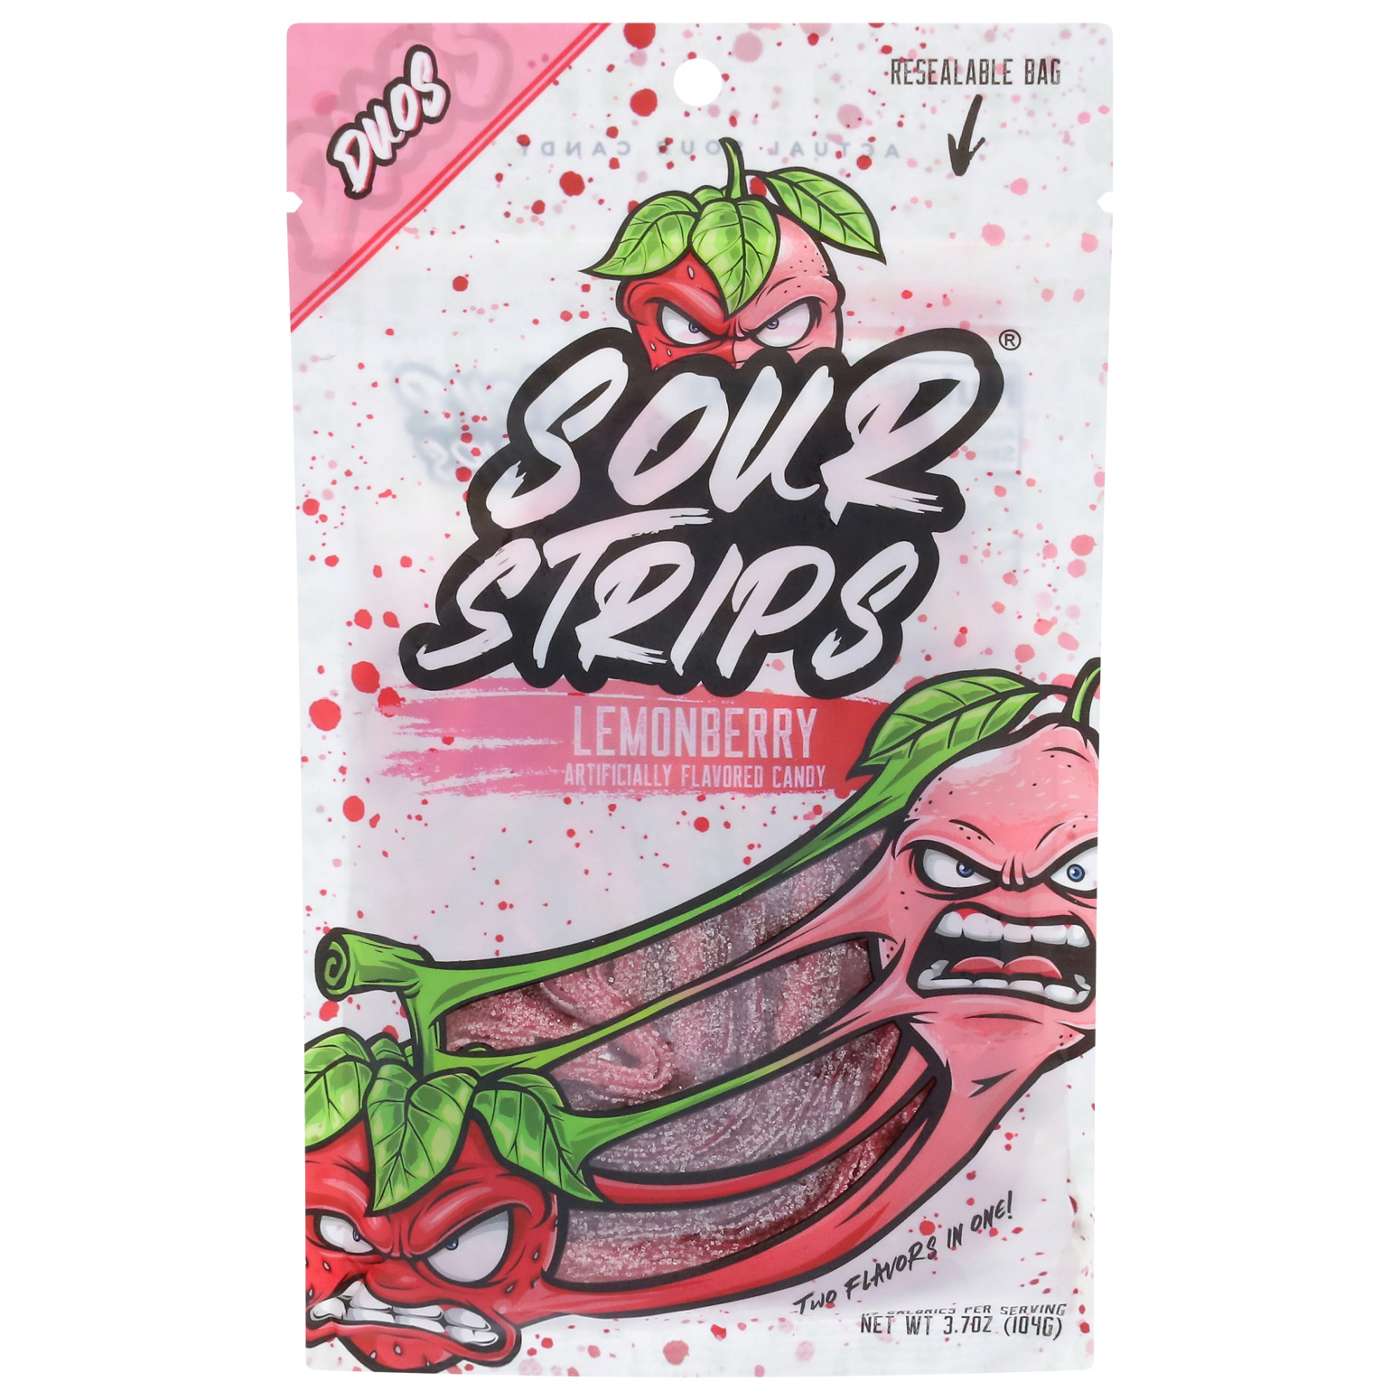 Sour Strips Lemonberry Candy; image 1 of 2